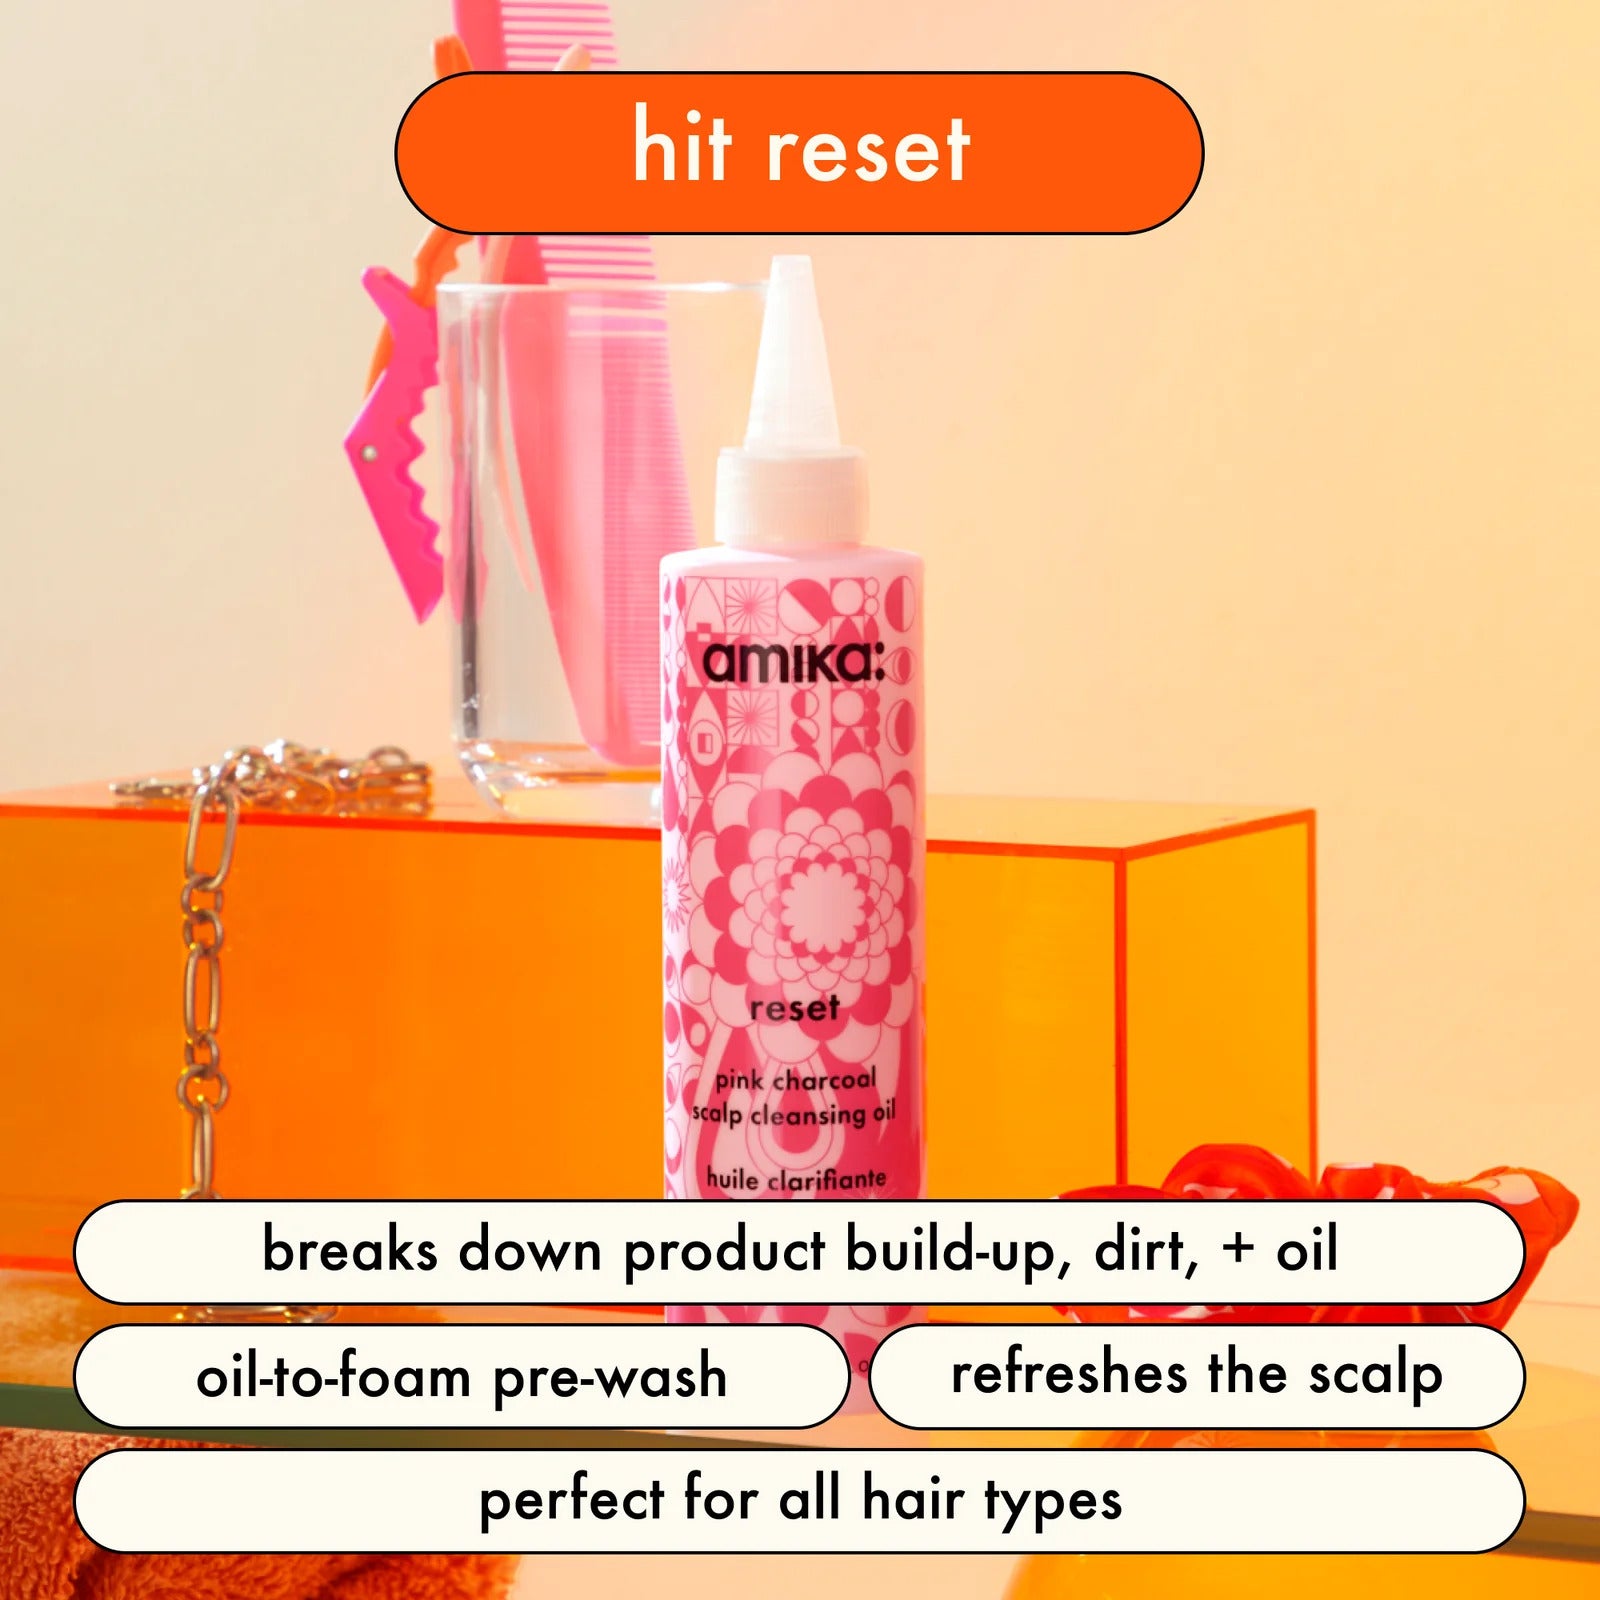 Oil-to-foam purifying pre-wash by Amika (Reset Pink Charcoal Scalp Cleansing Oil)